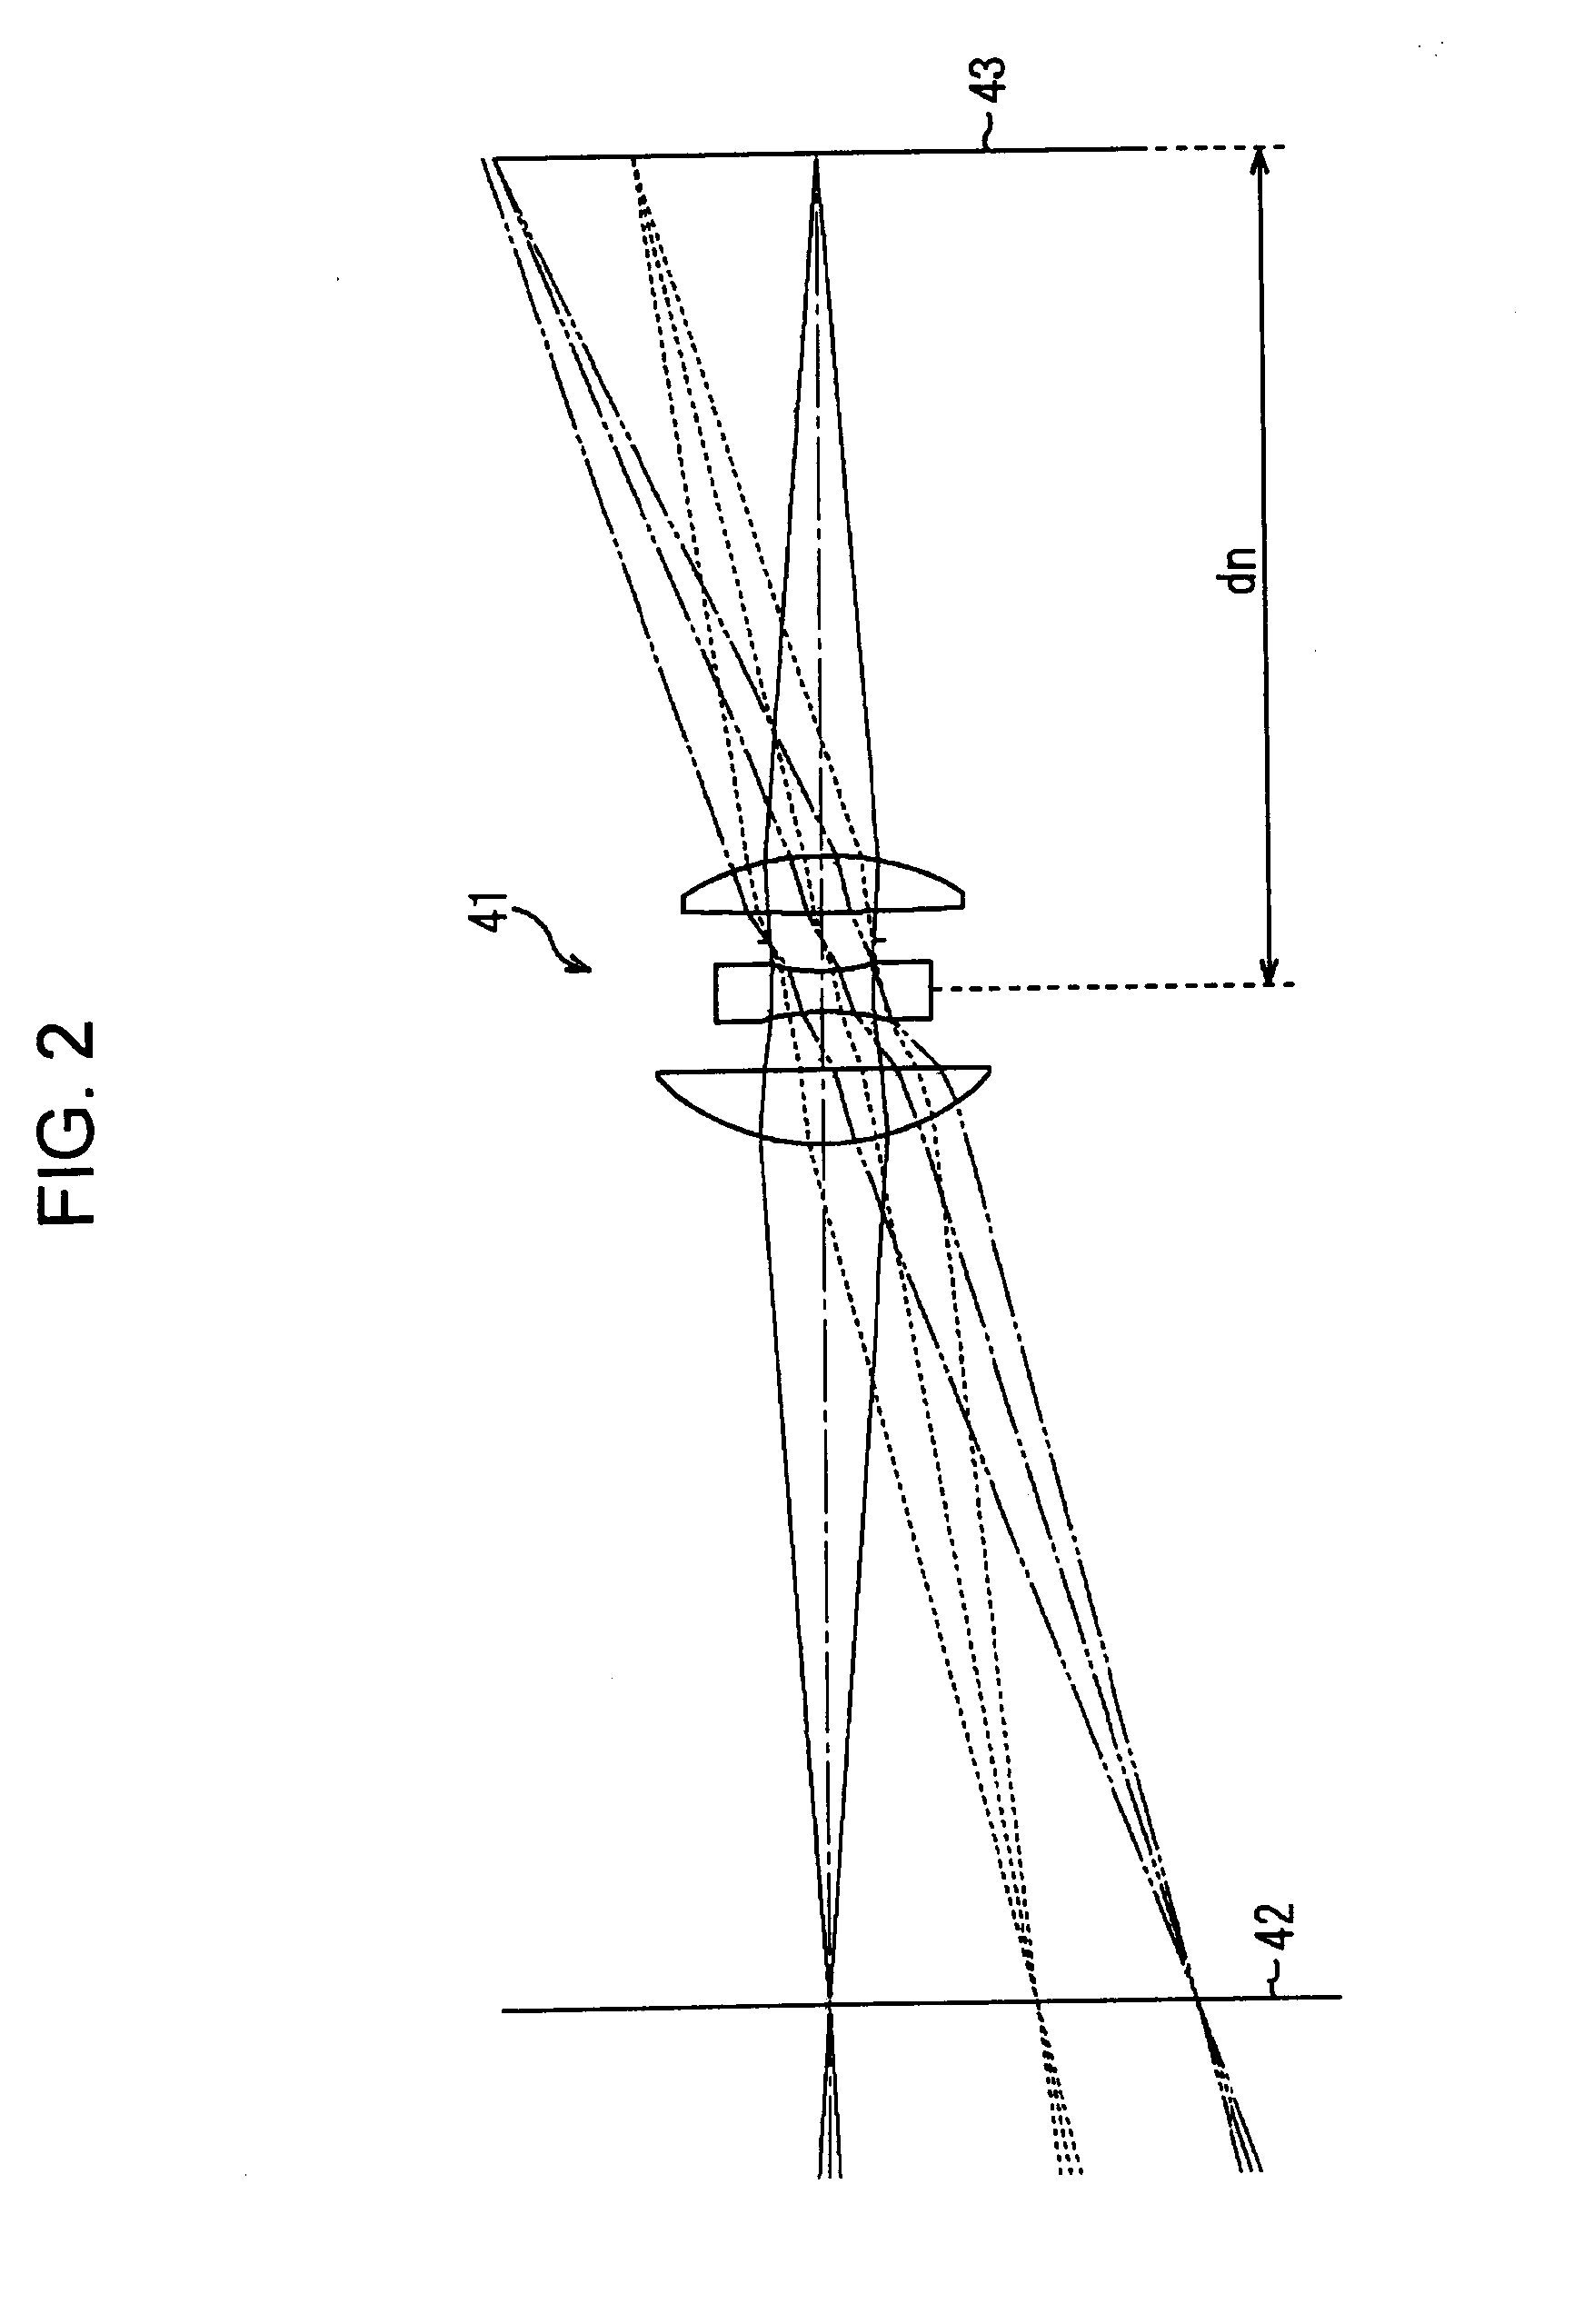 Imaging apparatus and method, and method for designing imaging apparatus